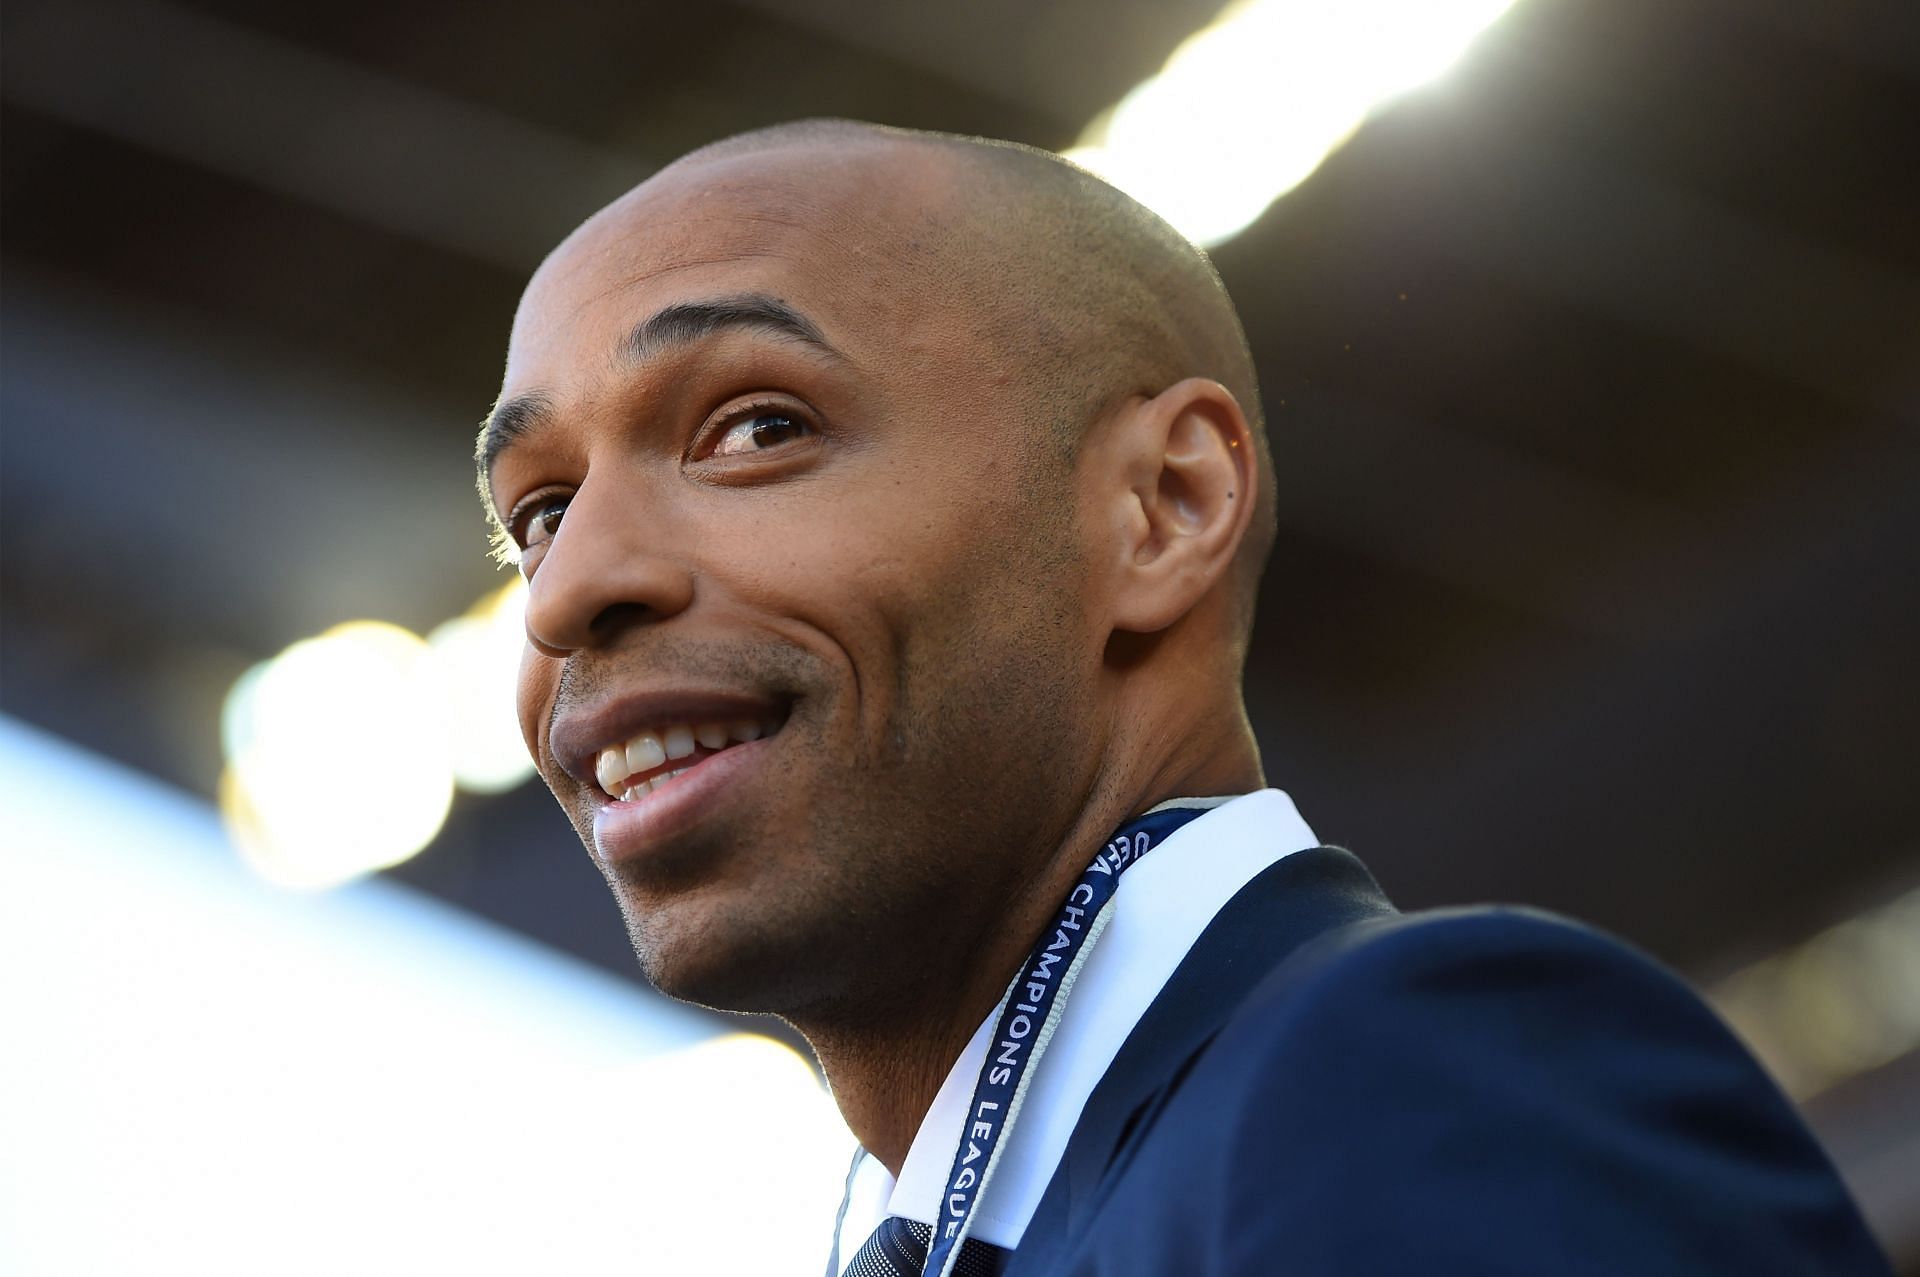 Thierry Henry ahead of a Champions League fixture in 2020.